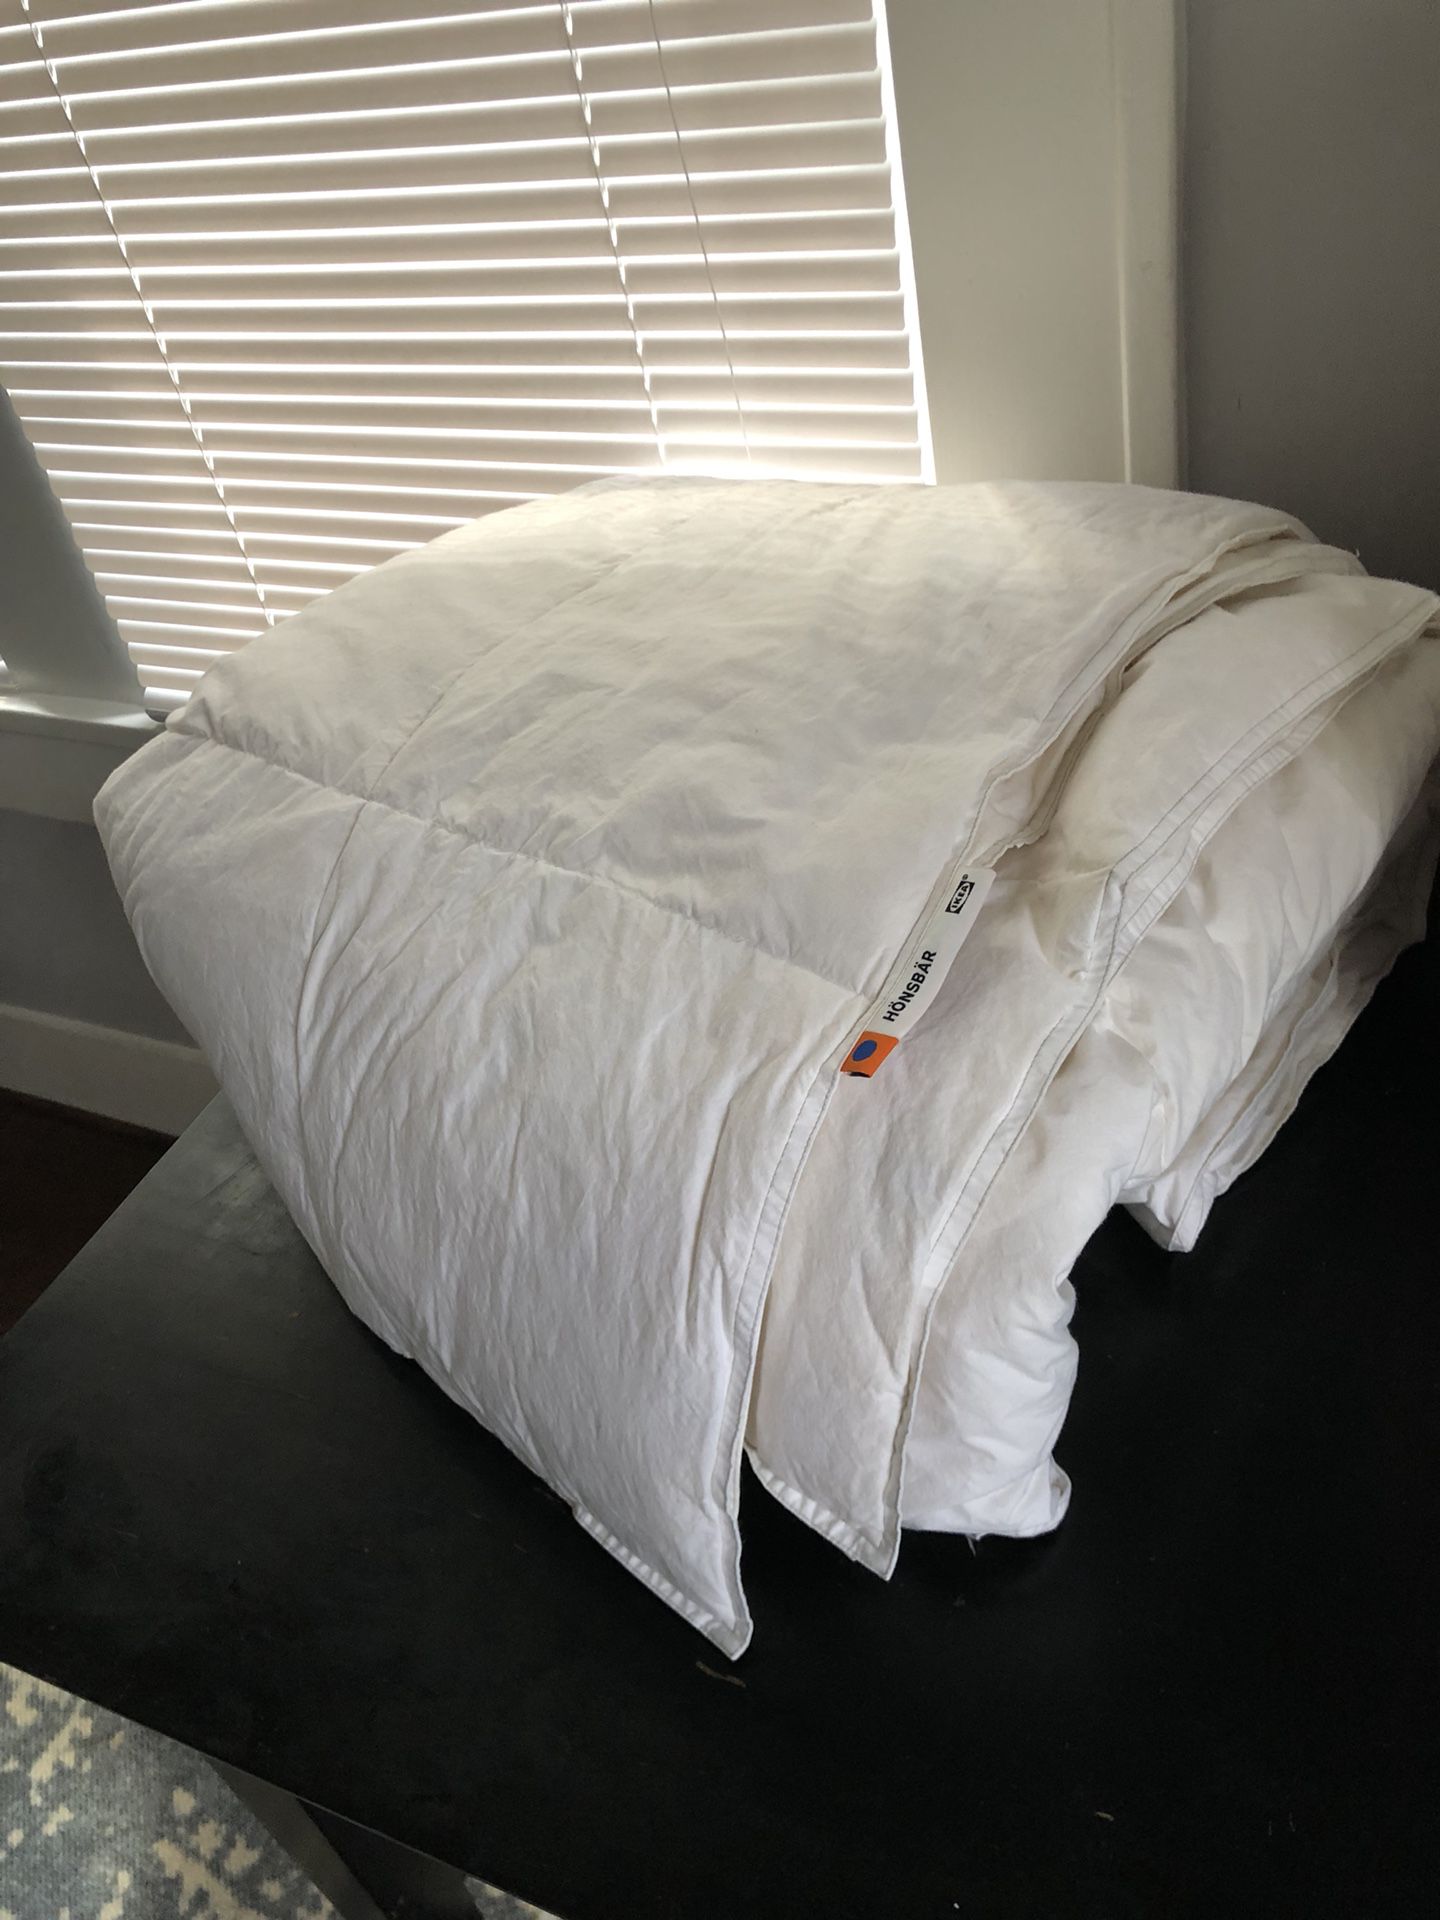 FULL Down Comforter no wear, stain, rips or defects at all JUST DRY CLEANED